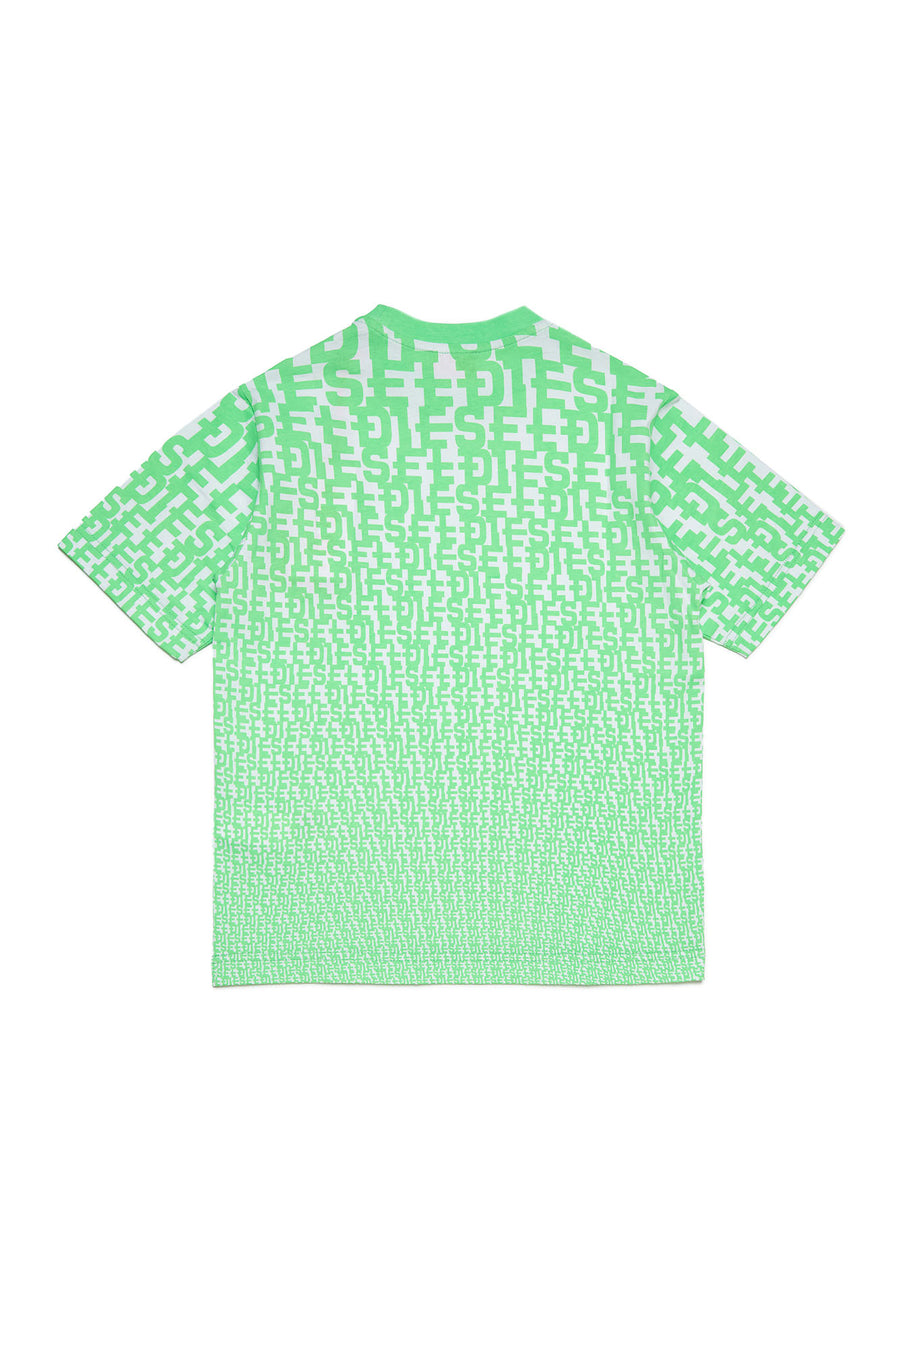 Tone on tone green t-shirt by Diesel